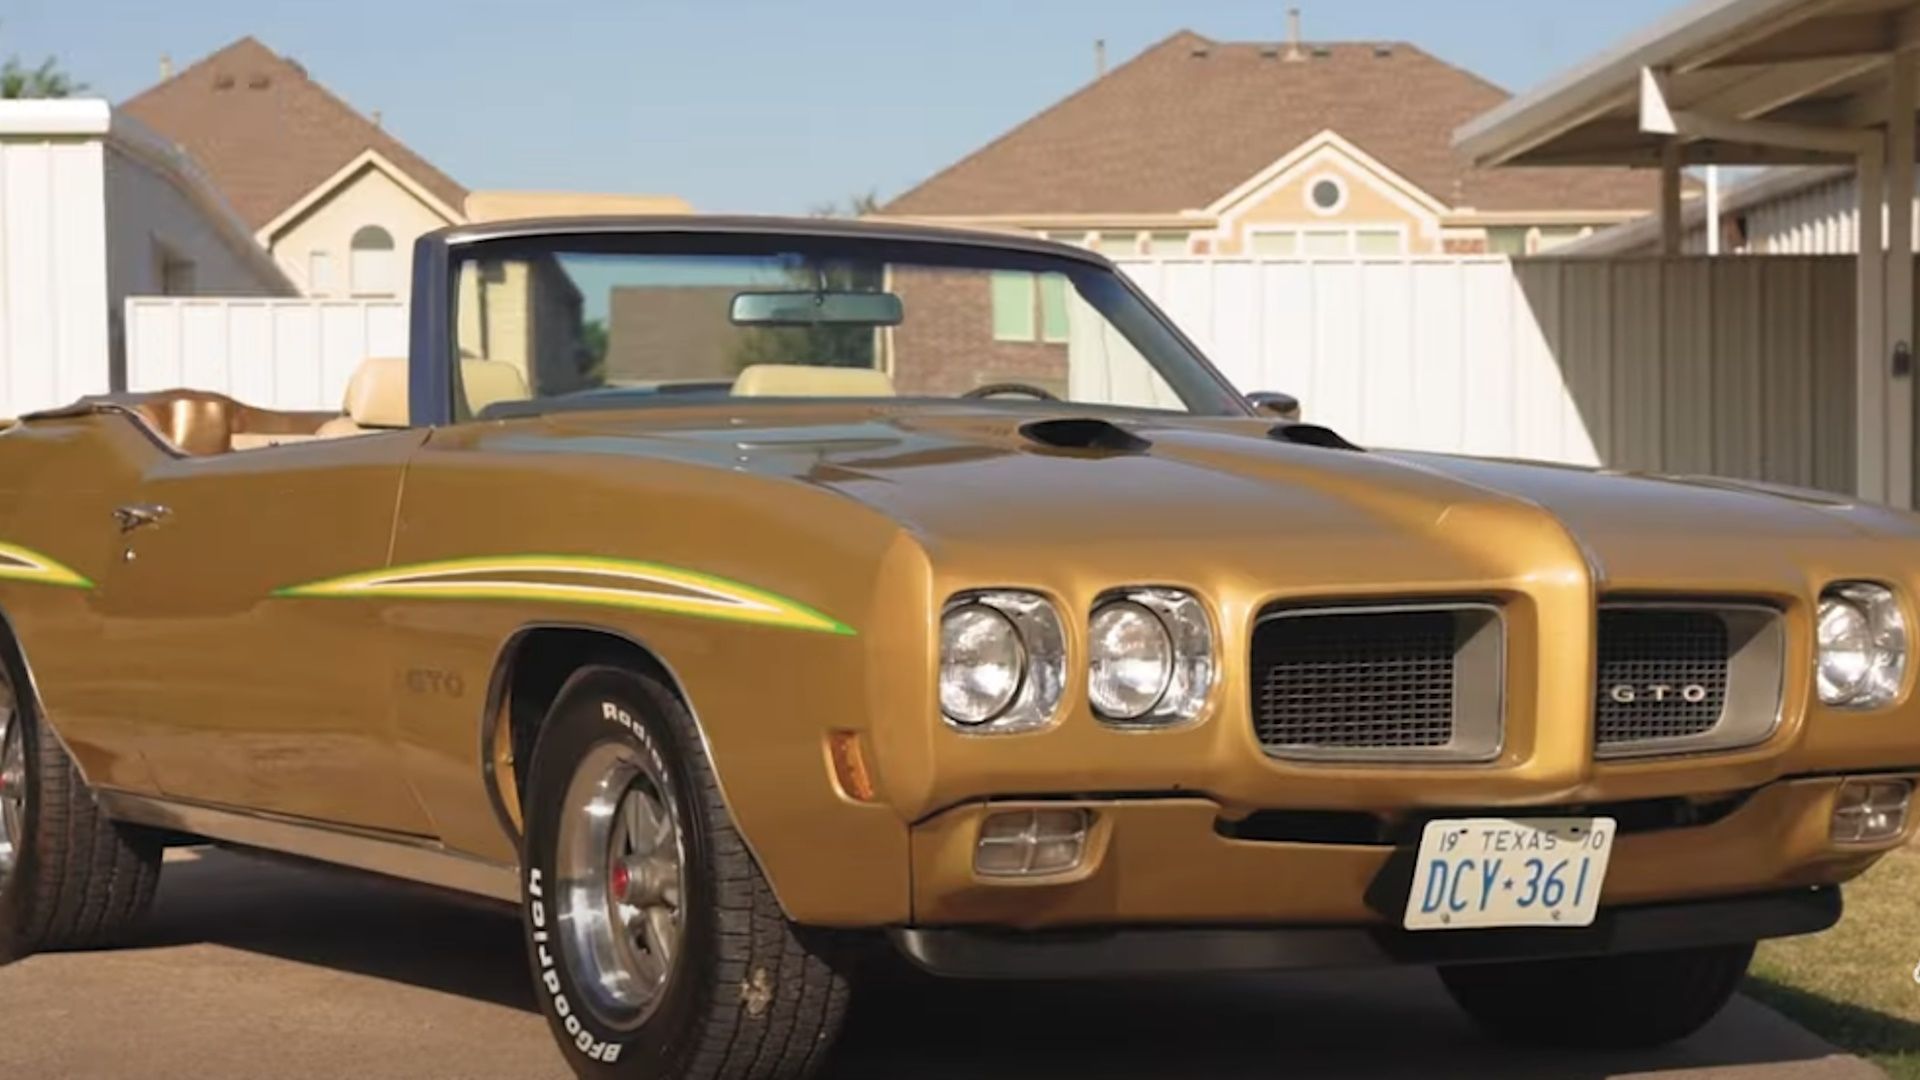 A gold 1970 Pontiac GTO convertible with the top down